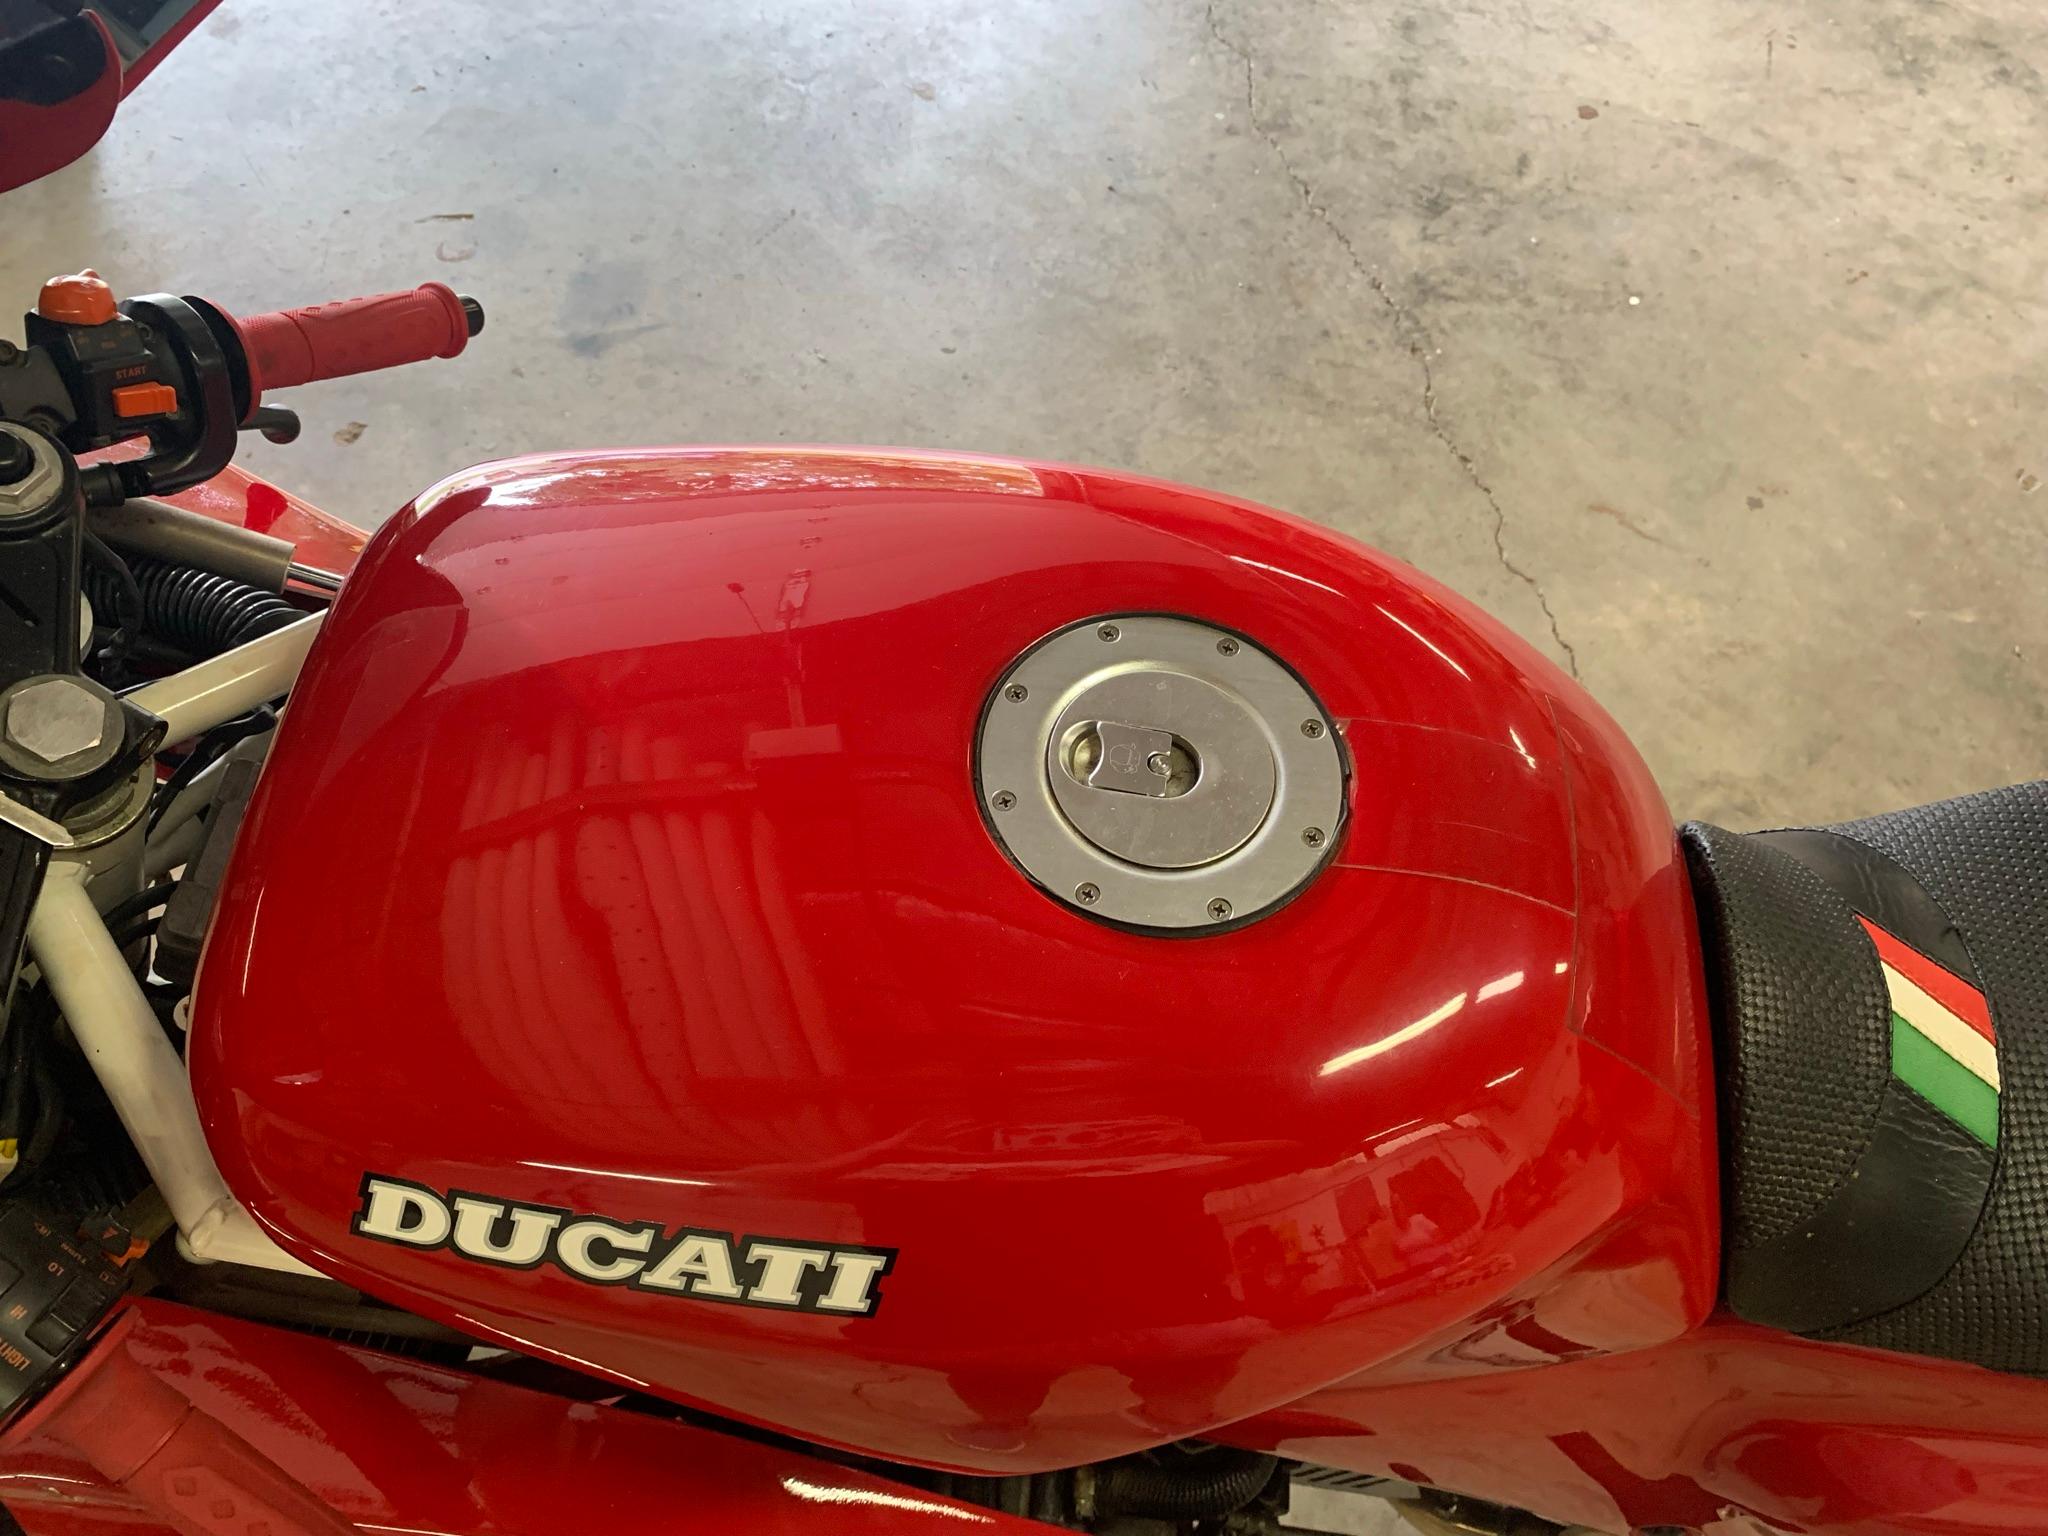 1990 Ducati 851 Sport Superbike. Clean Title & Many Parts Included.